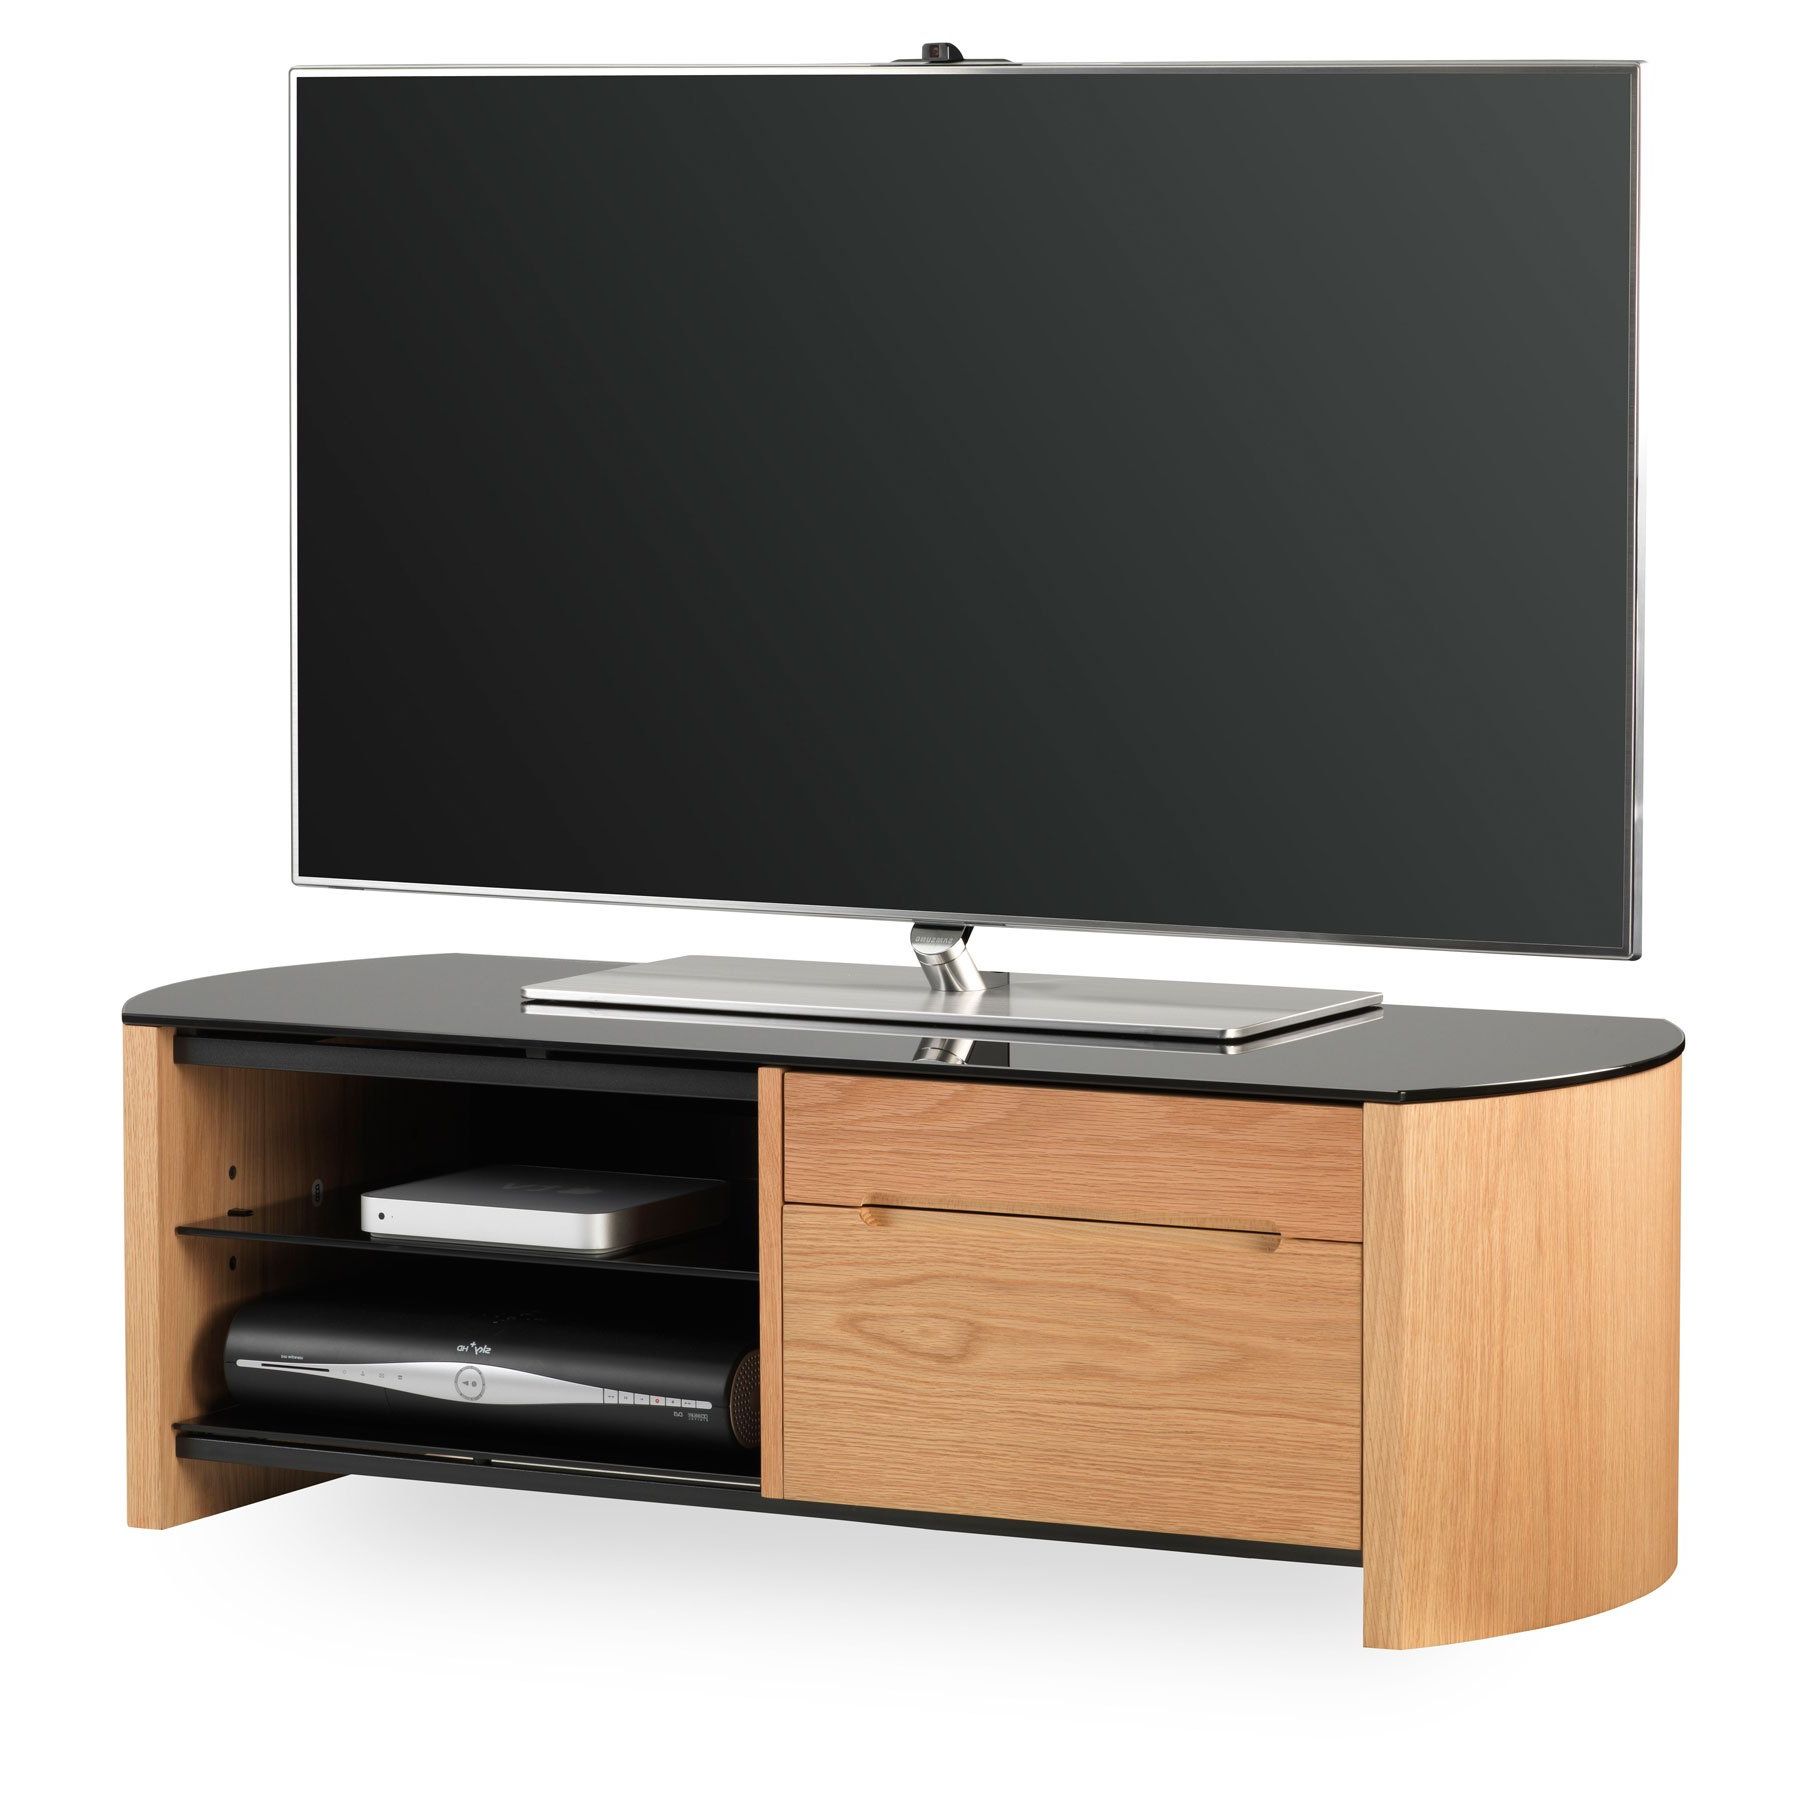 Alphason Finewood Fw1100cb Light Oak Tv Stand For Up To 50 Throughout Fashionable Tv Stands For Tvs Up To 50" (Photo 8 of 25)